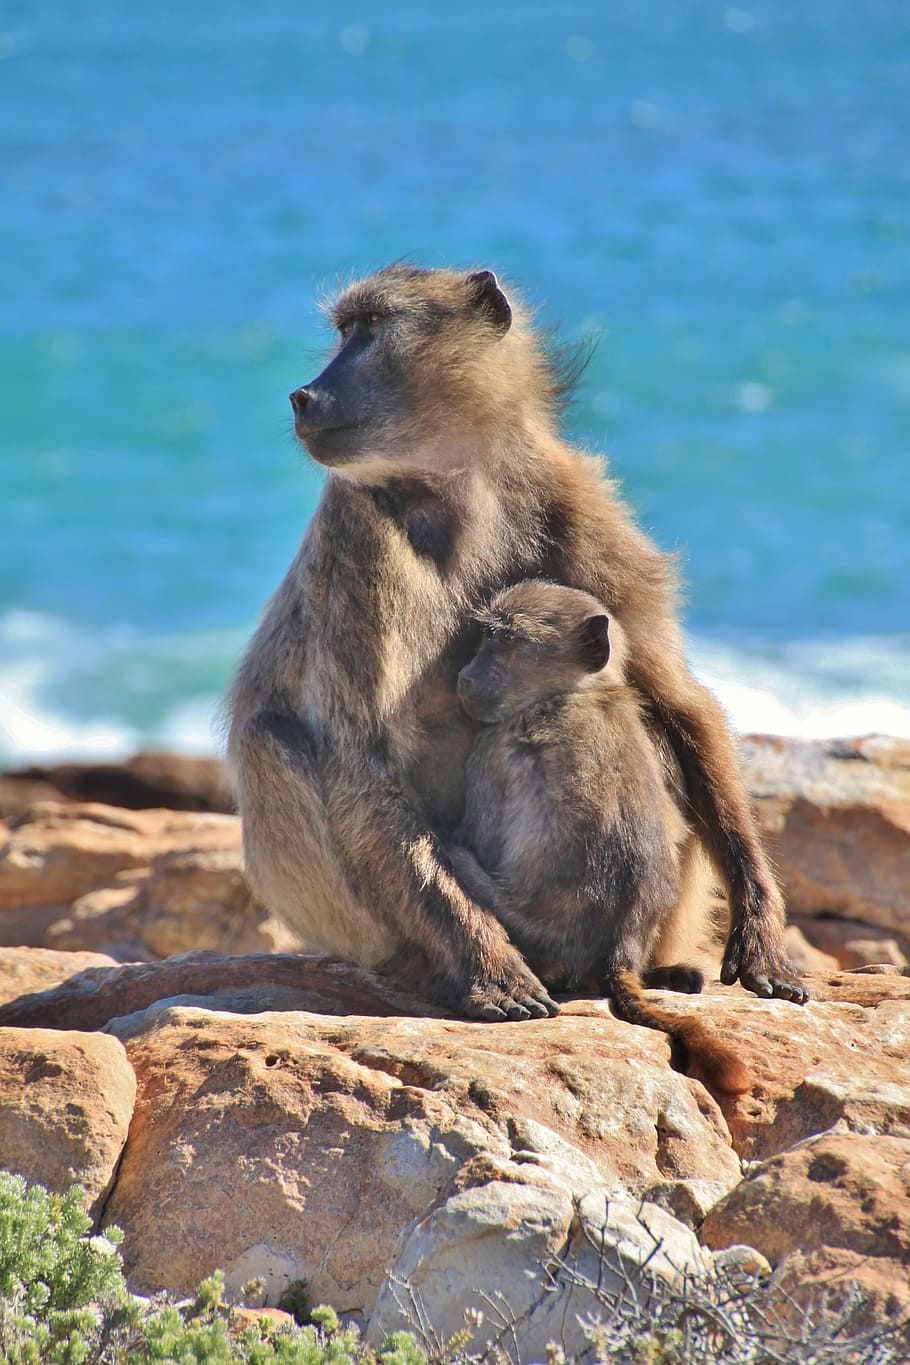 monkey sitting beside infant with blue body of water in the horizon during daytime